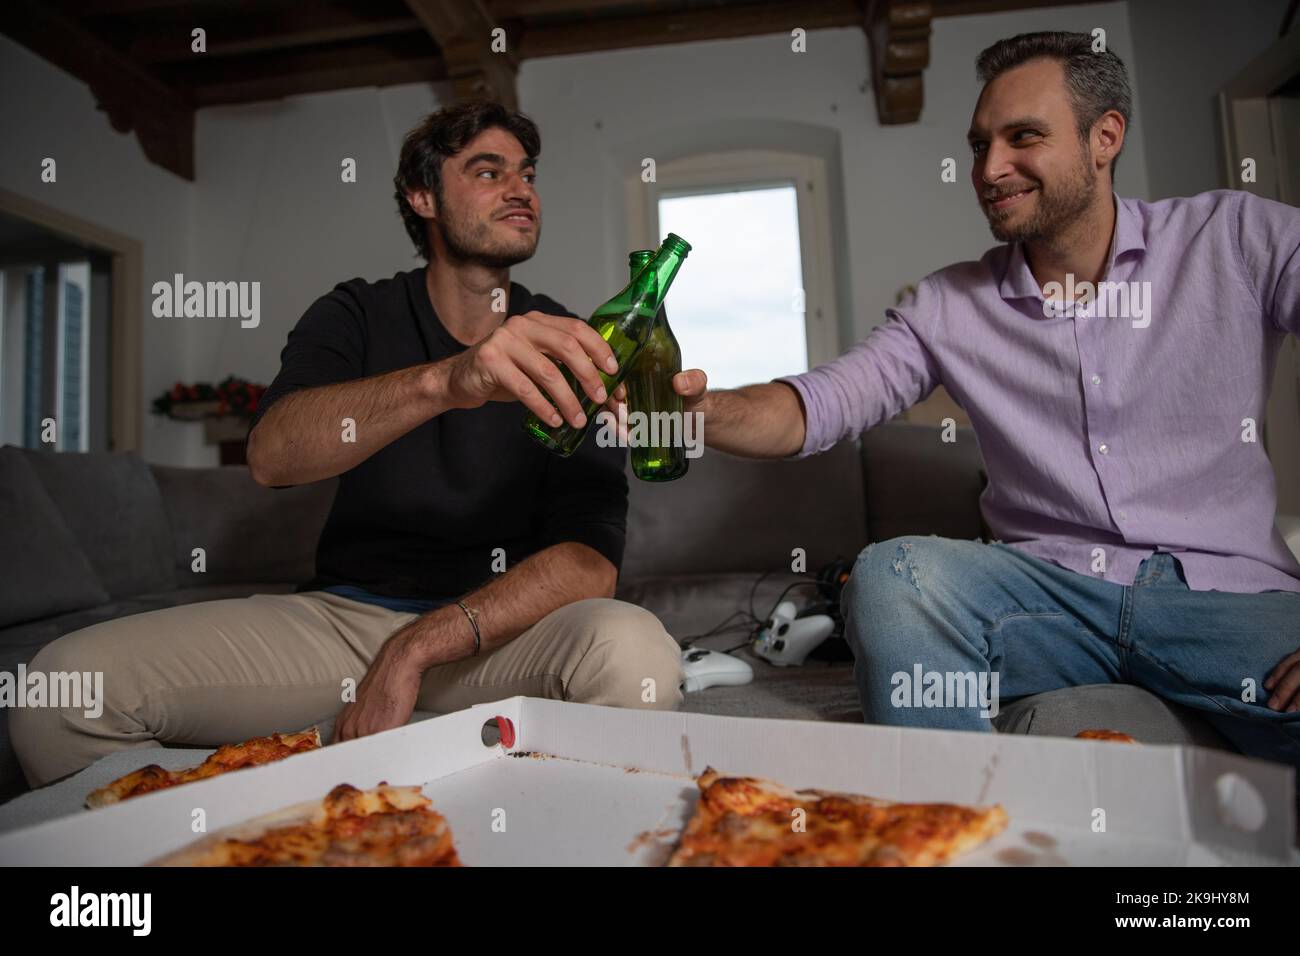 Two friends toast with two beers on break from video game eating pizza. Stock Photo